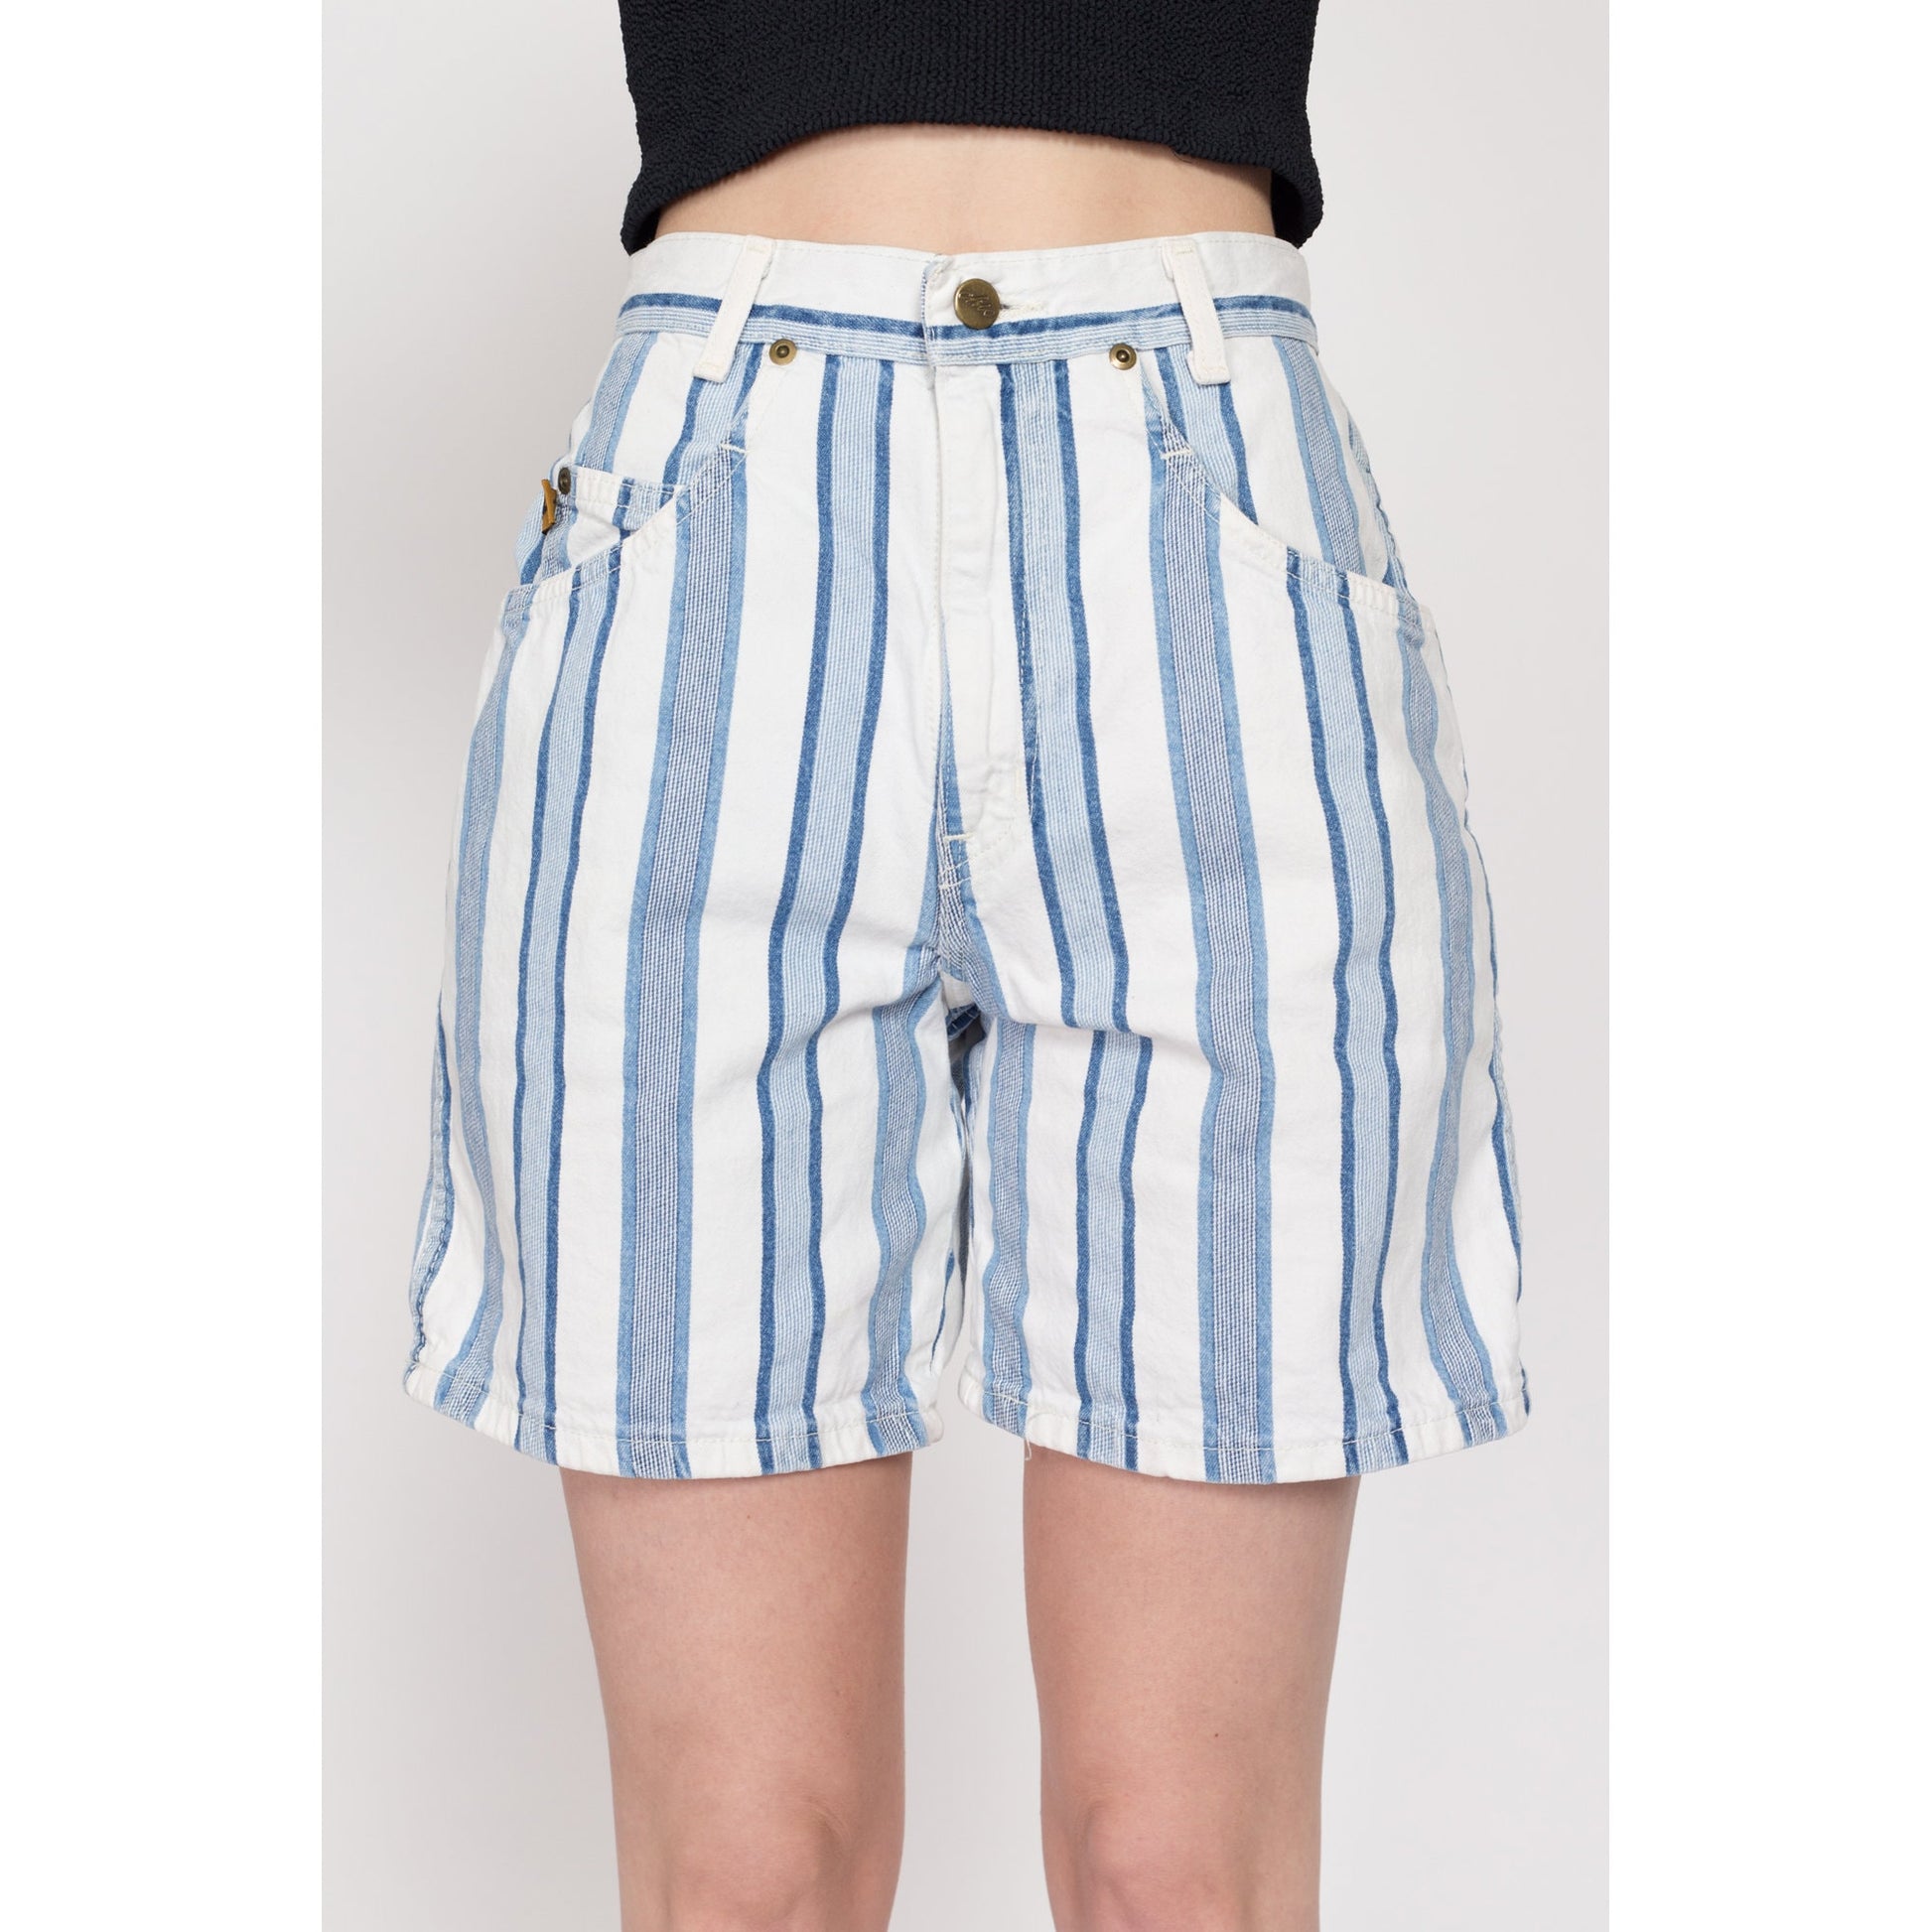 XS 80s Blue & White Striped Jean Shorts 25.5" | Vintage Chic High Waisted Denim Shorts